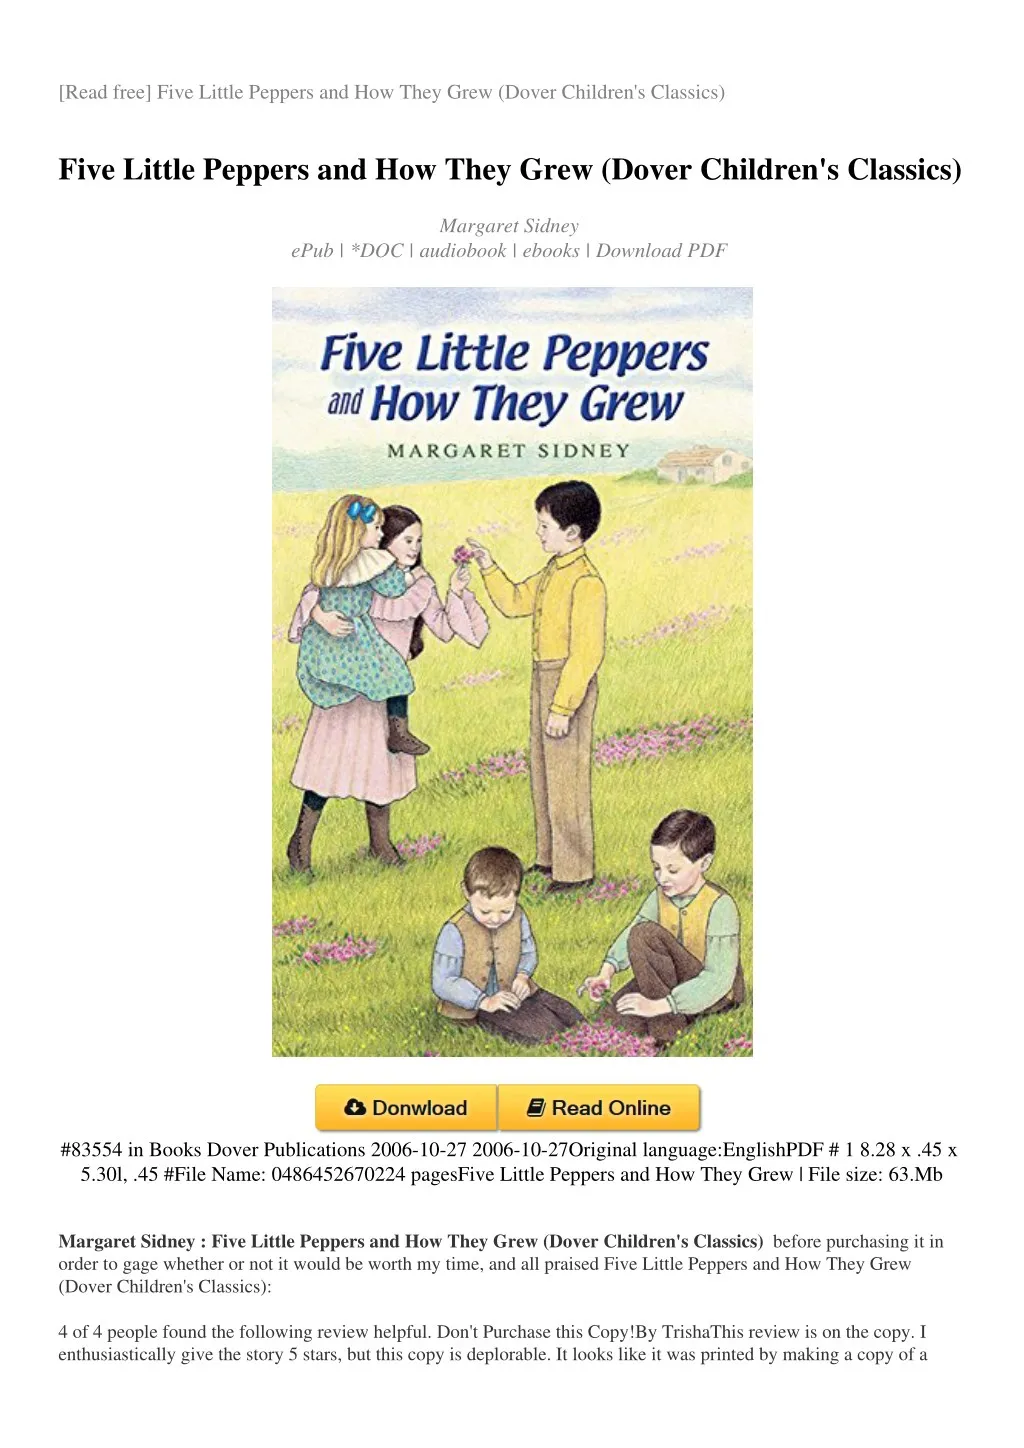 read free five little peppers and how they grew